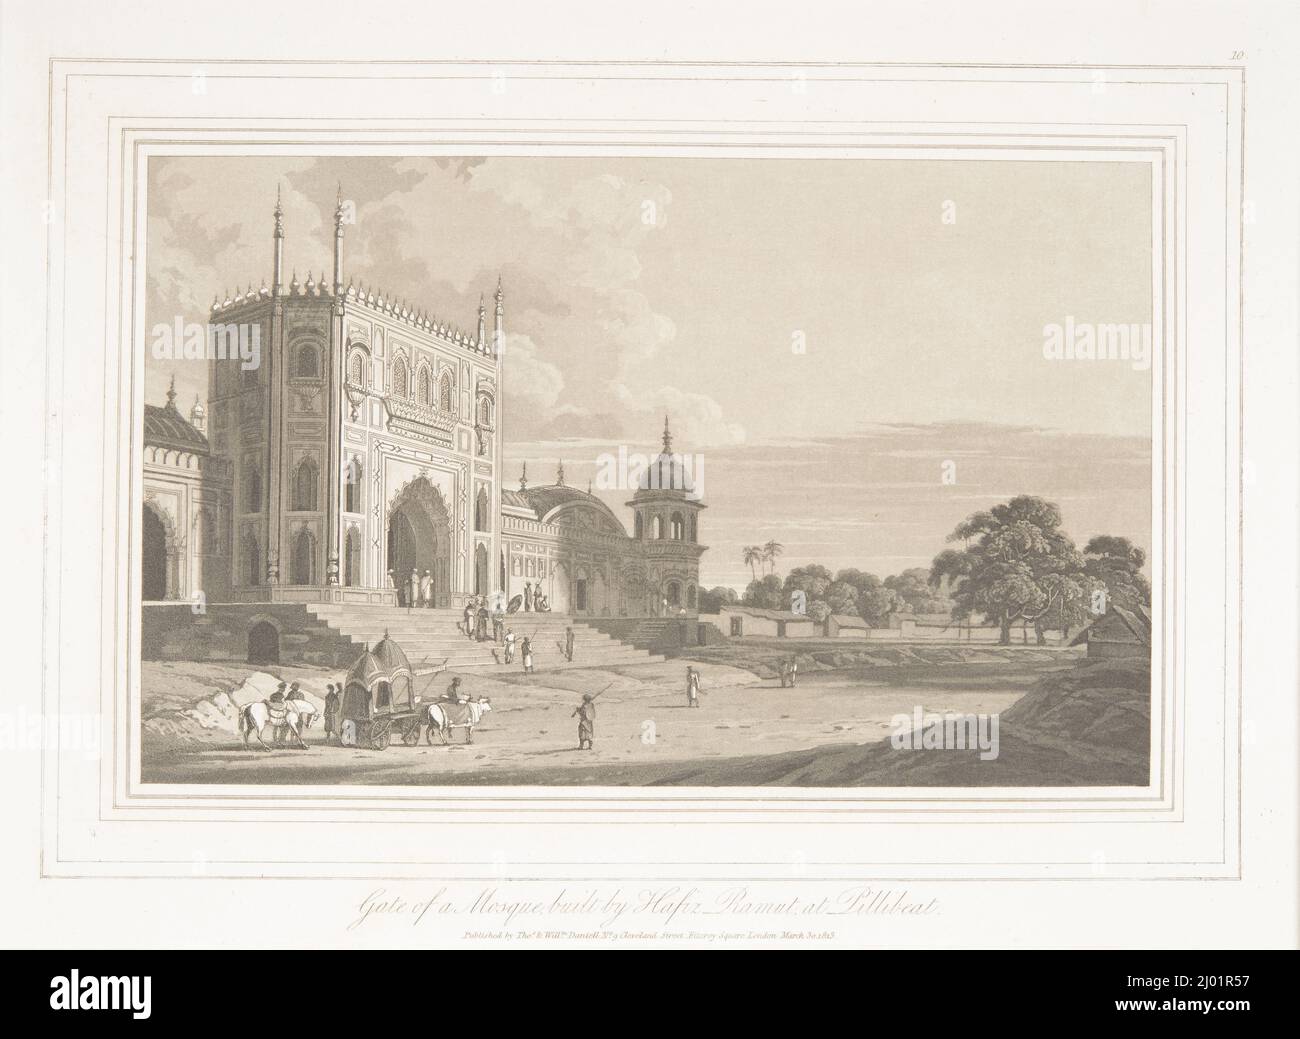 Gate of a Mosque, built by Hafez Ramut, at Pillibeat from 'Oriental Scenery, Quarto Prints'. Thomas Daniell (England, London, 1749-1840)Longman, Hurst, Rees, Orme and Brown (England, London)Free-School Press (England, London)William Daniell (England, London, 1769-1837). England, London, May 1, 1813. Prints; engravings. Aquatint engraving Stock Photo